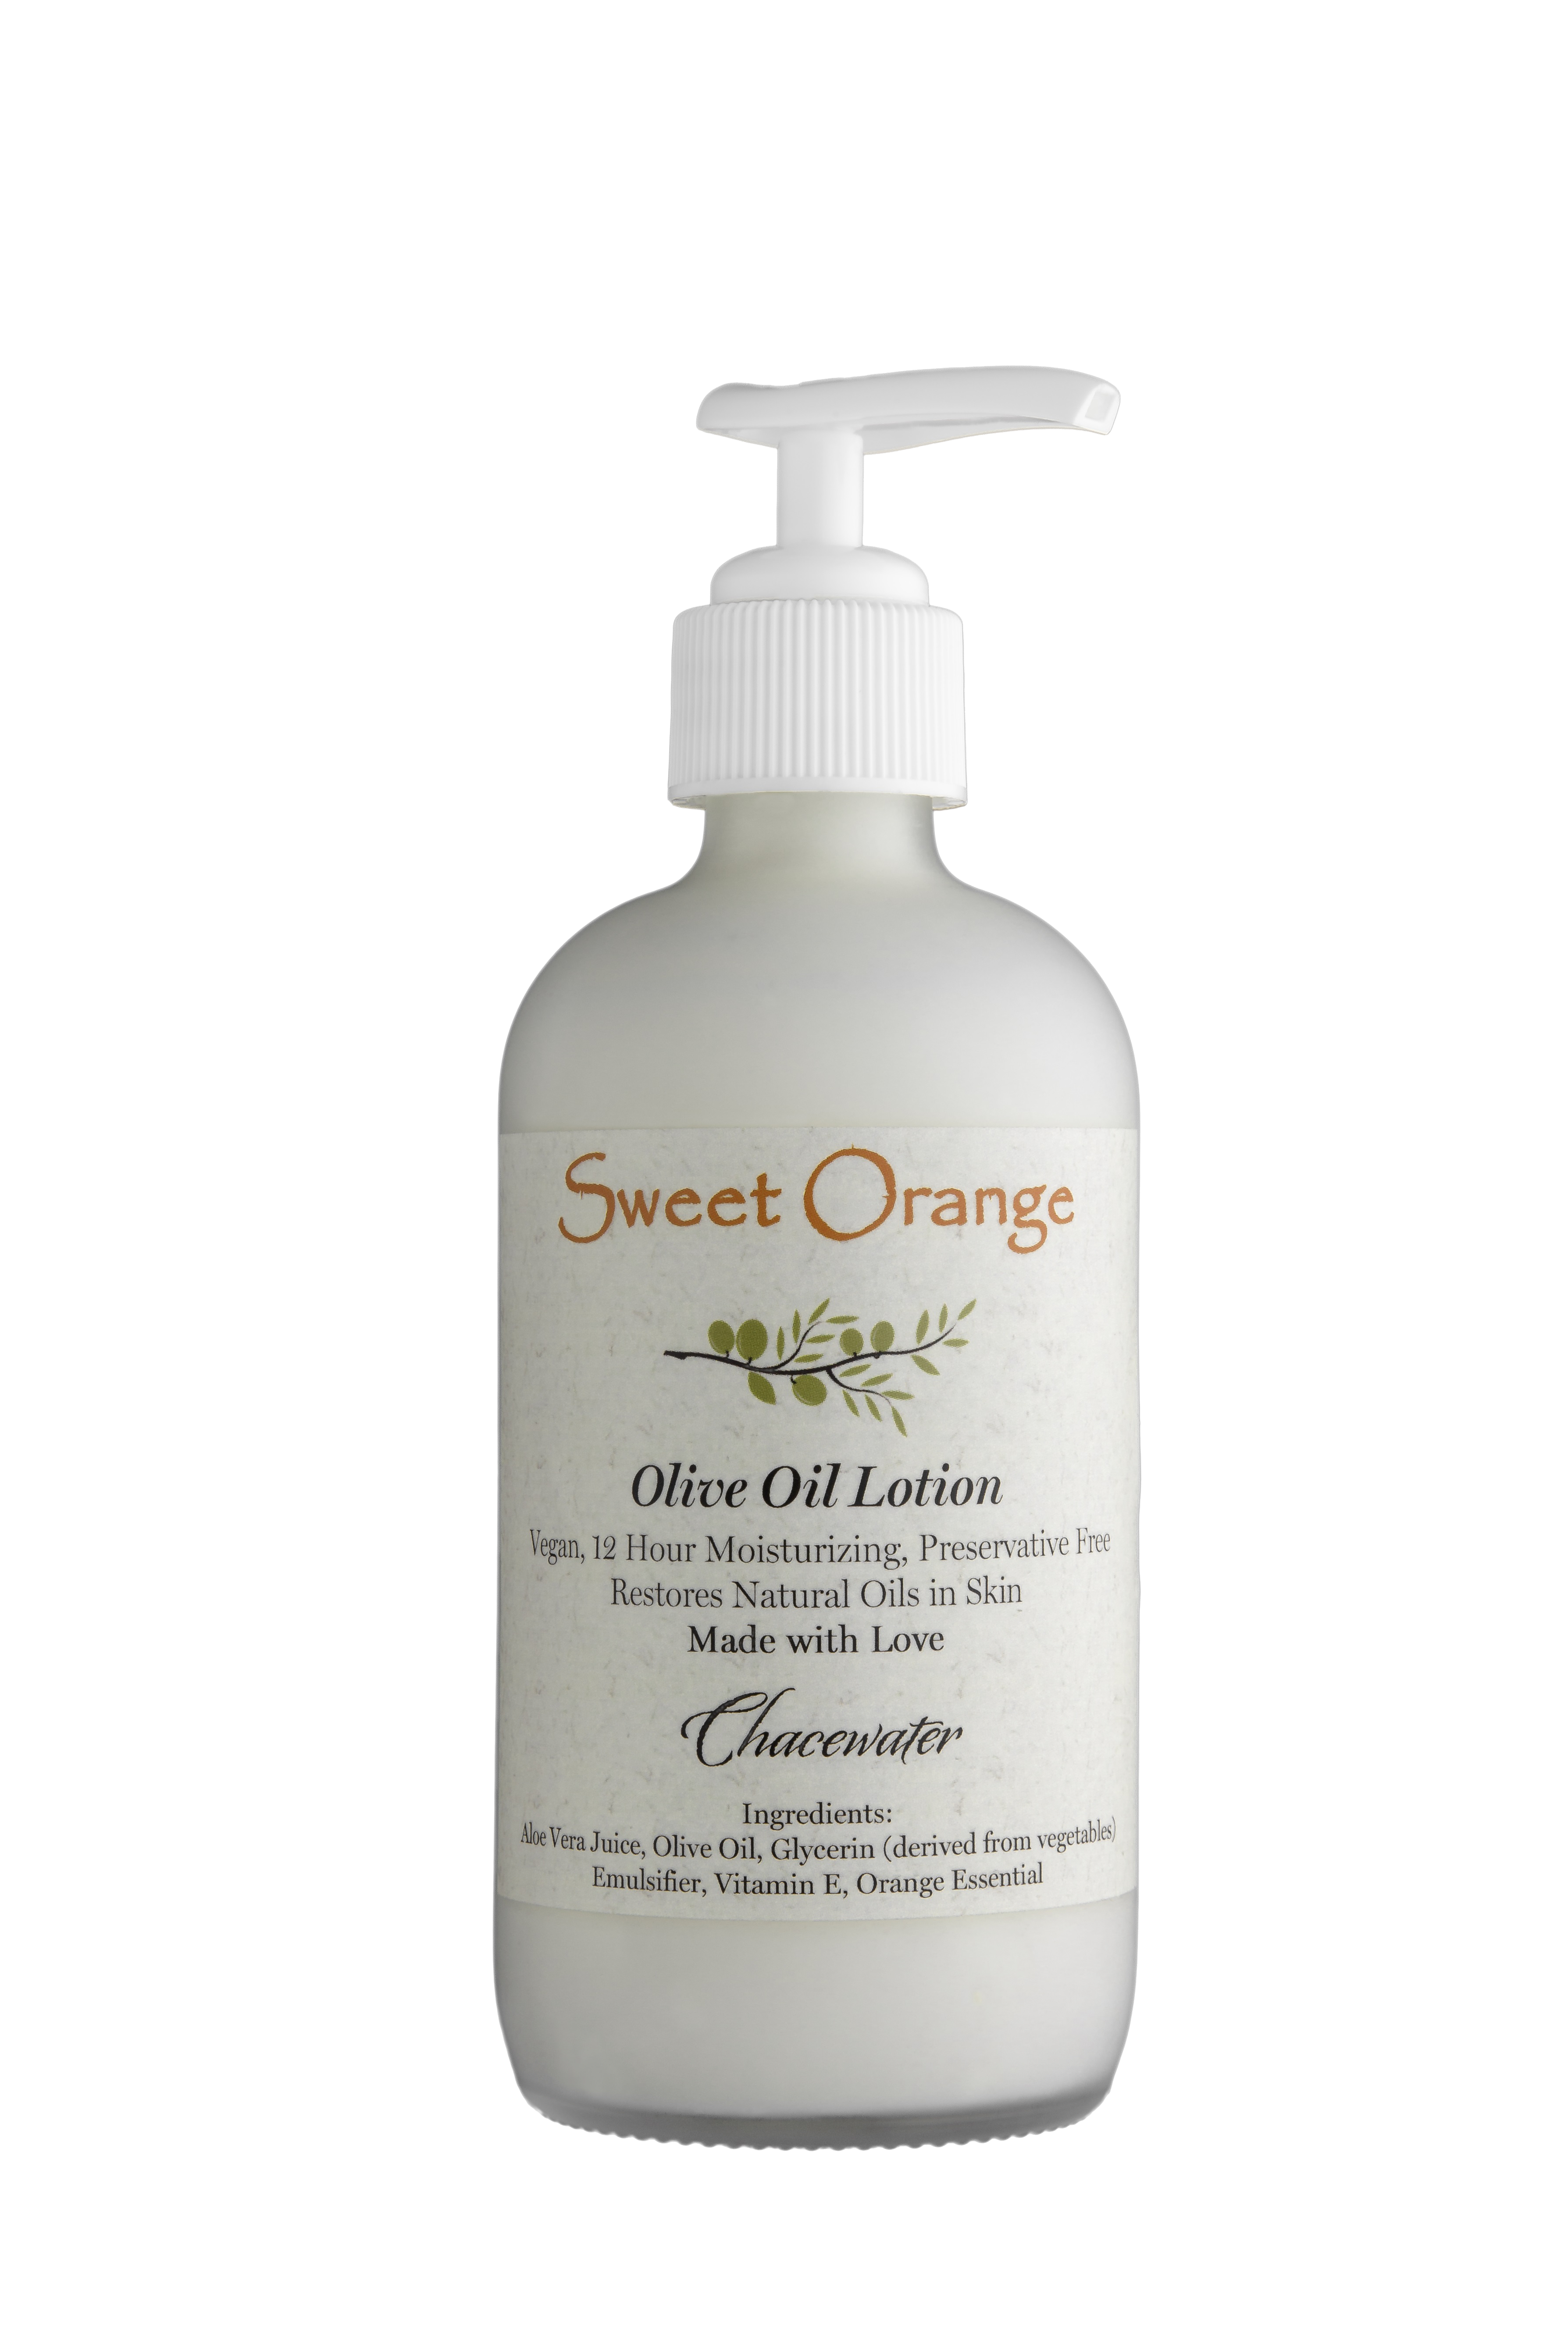 Product Image for Sweet Orange Olive Oil Lotion